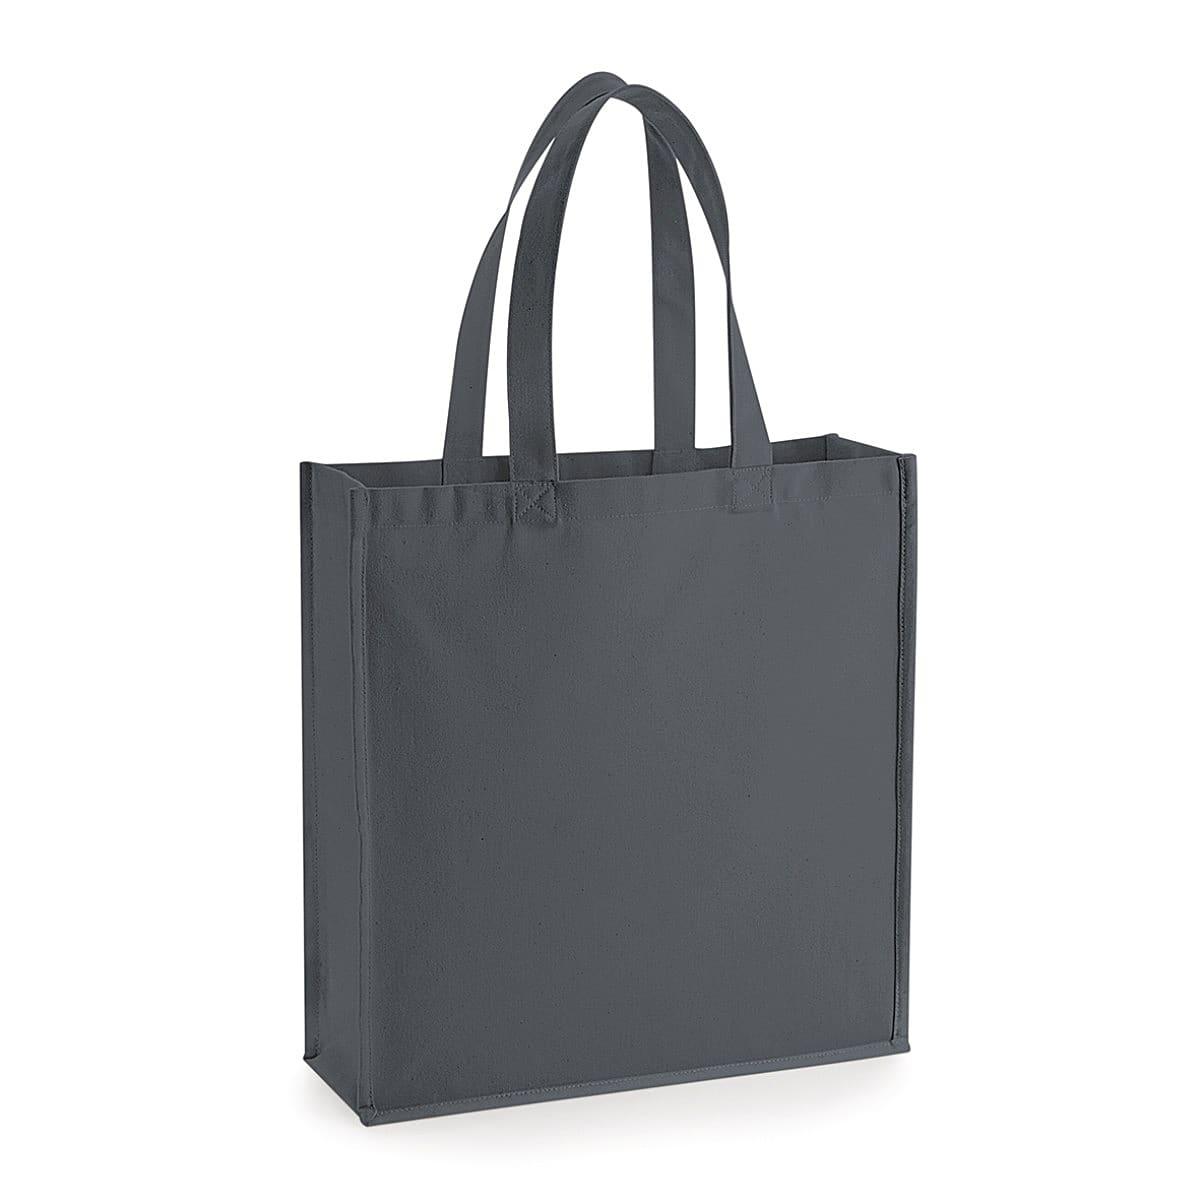 Westford Mill Gallery Canvas Tote in Graphite (Product Code: W600)